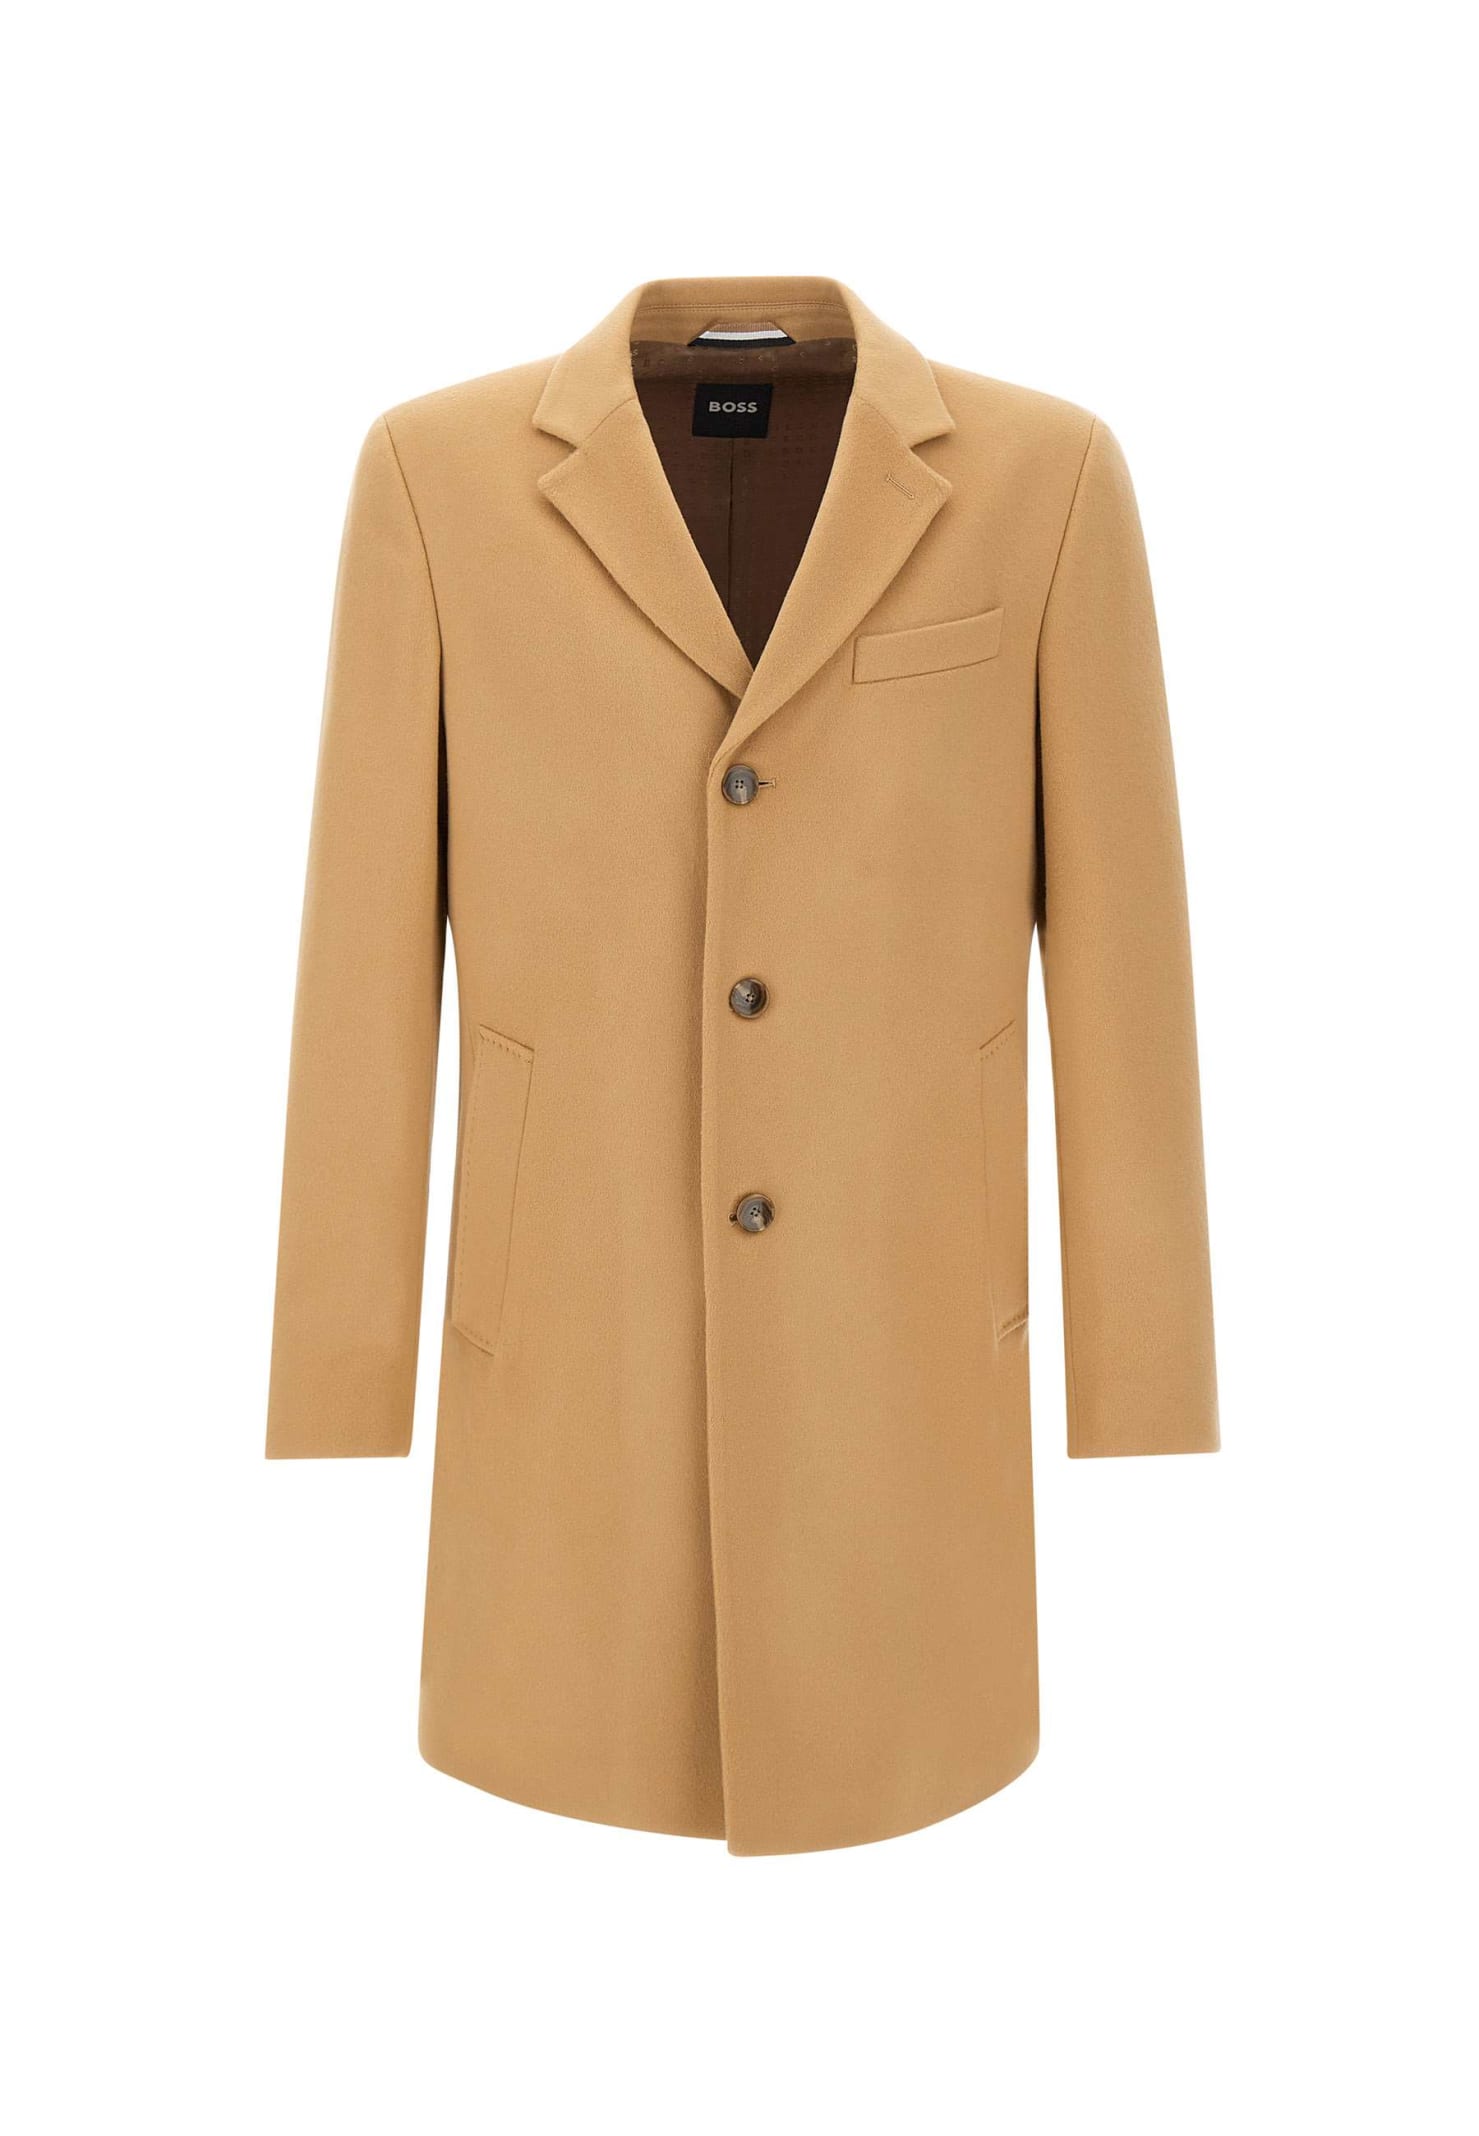 HUGO BOSS H-HYDE 234 WOOL AND CASHMERE COAT